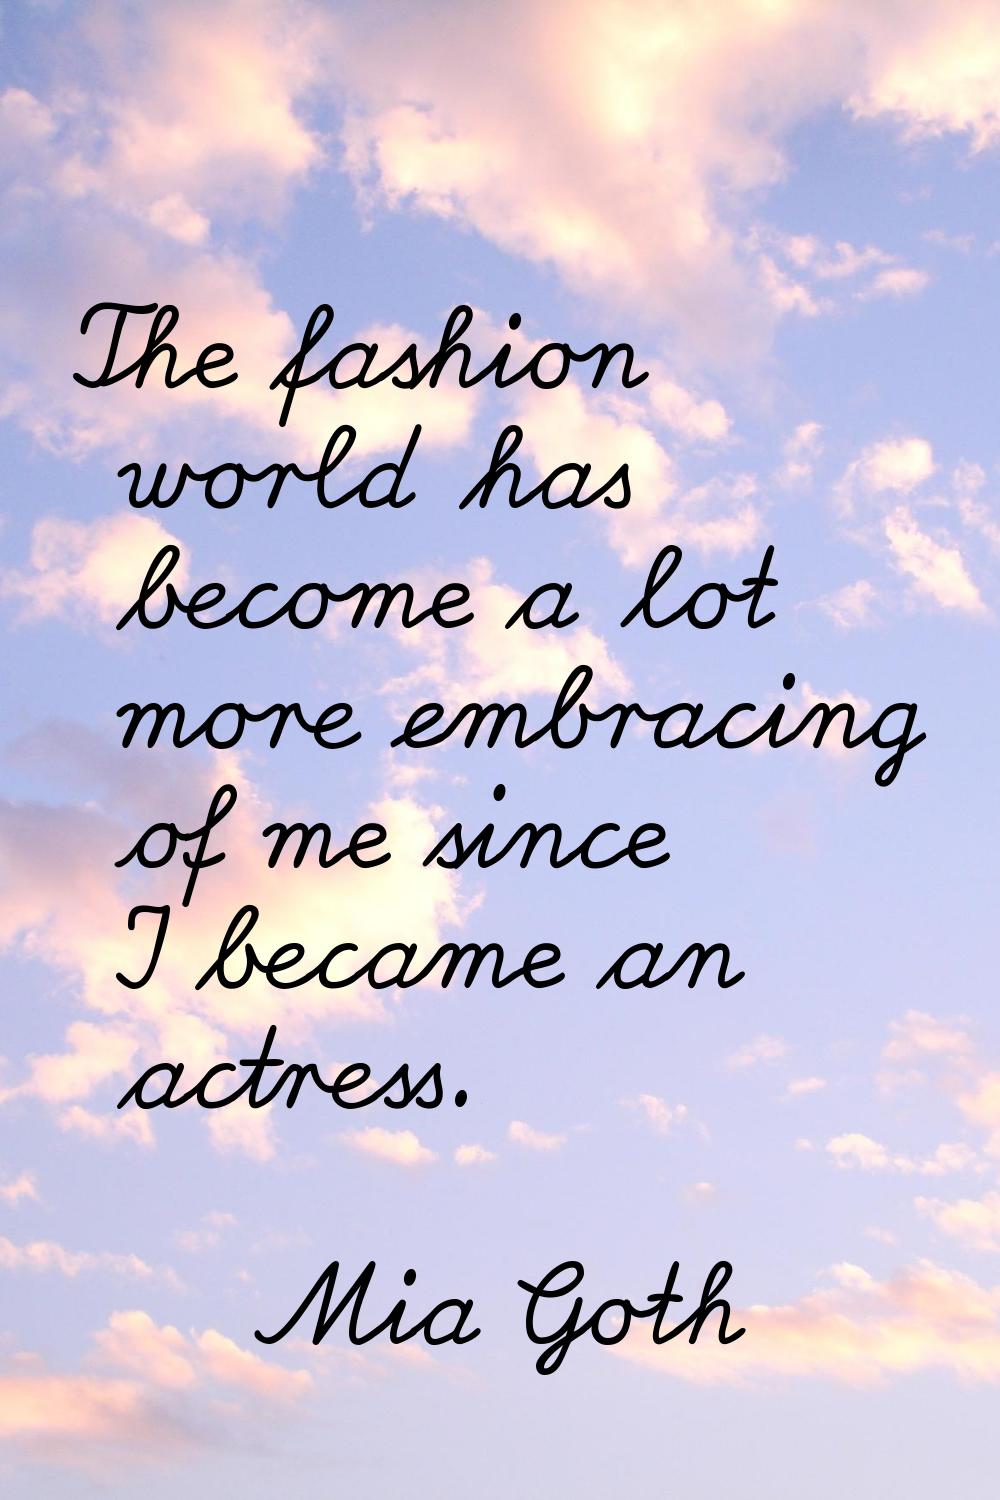 The fashion world has become a lot more embracing of me since I became an actress.